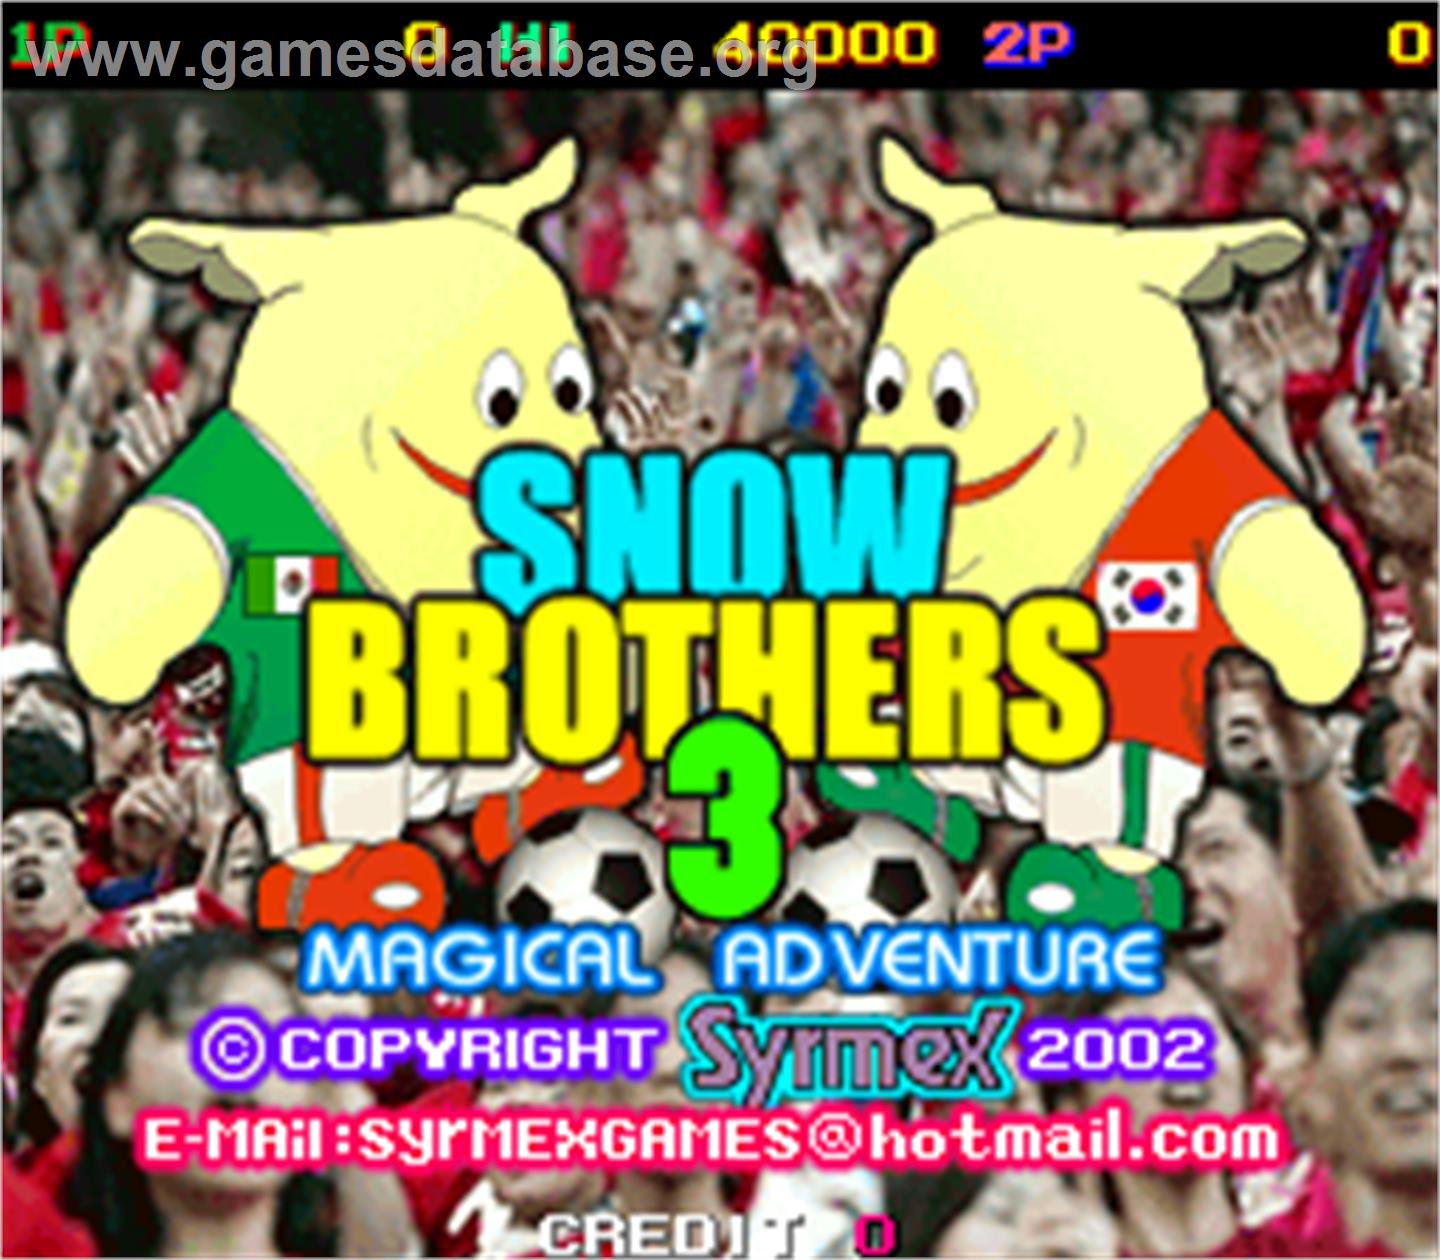 Snow Brothers 3 - Magical Adventure - Arcade - Artwork - Title Screen